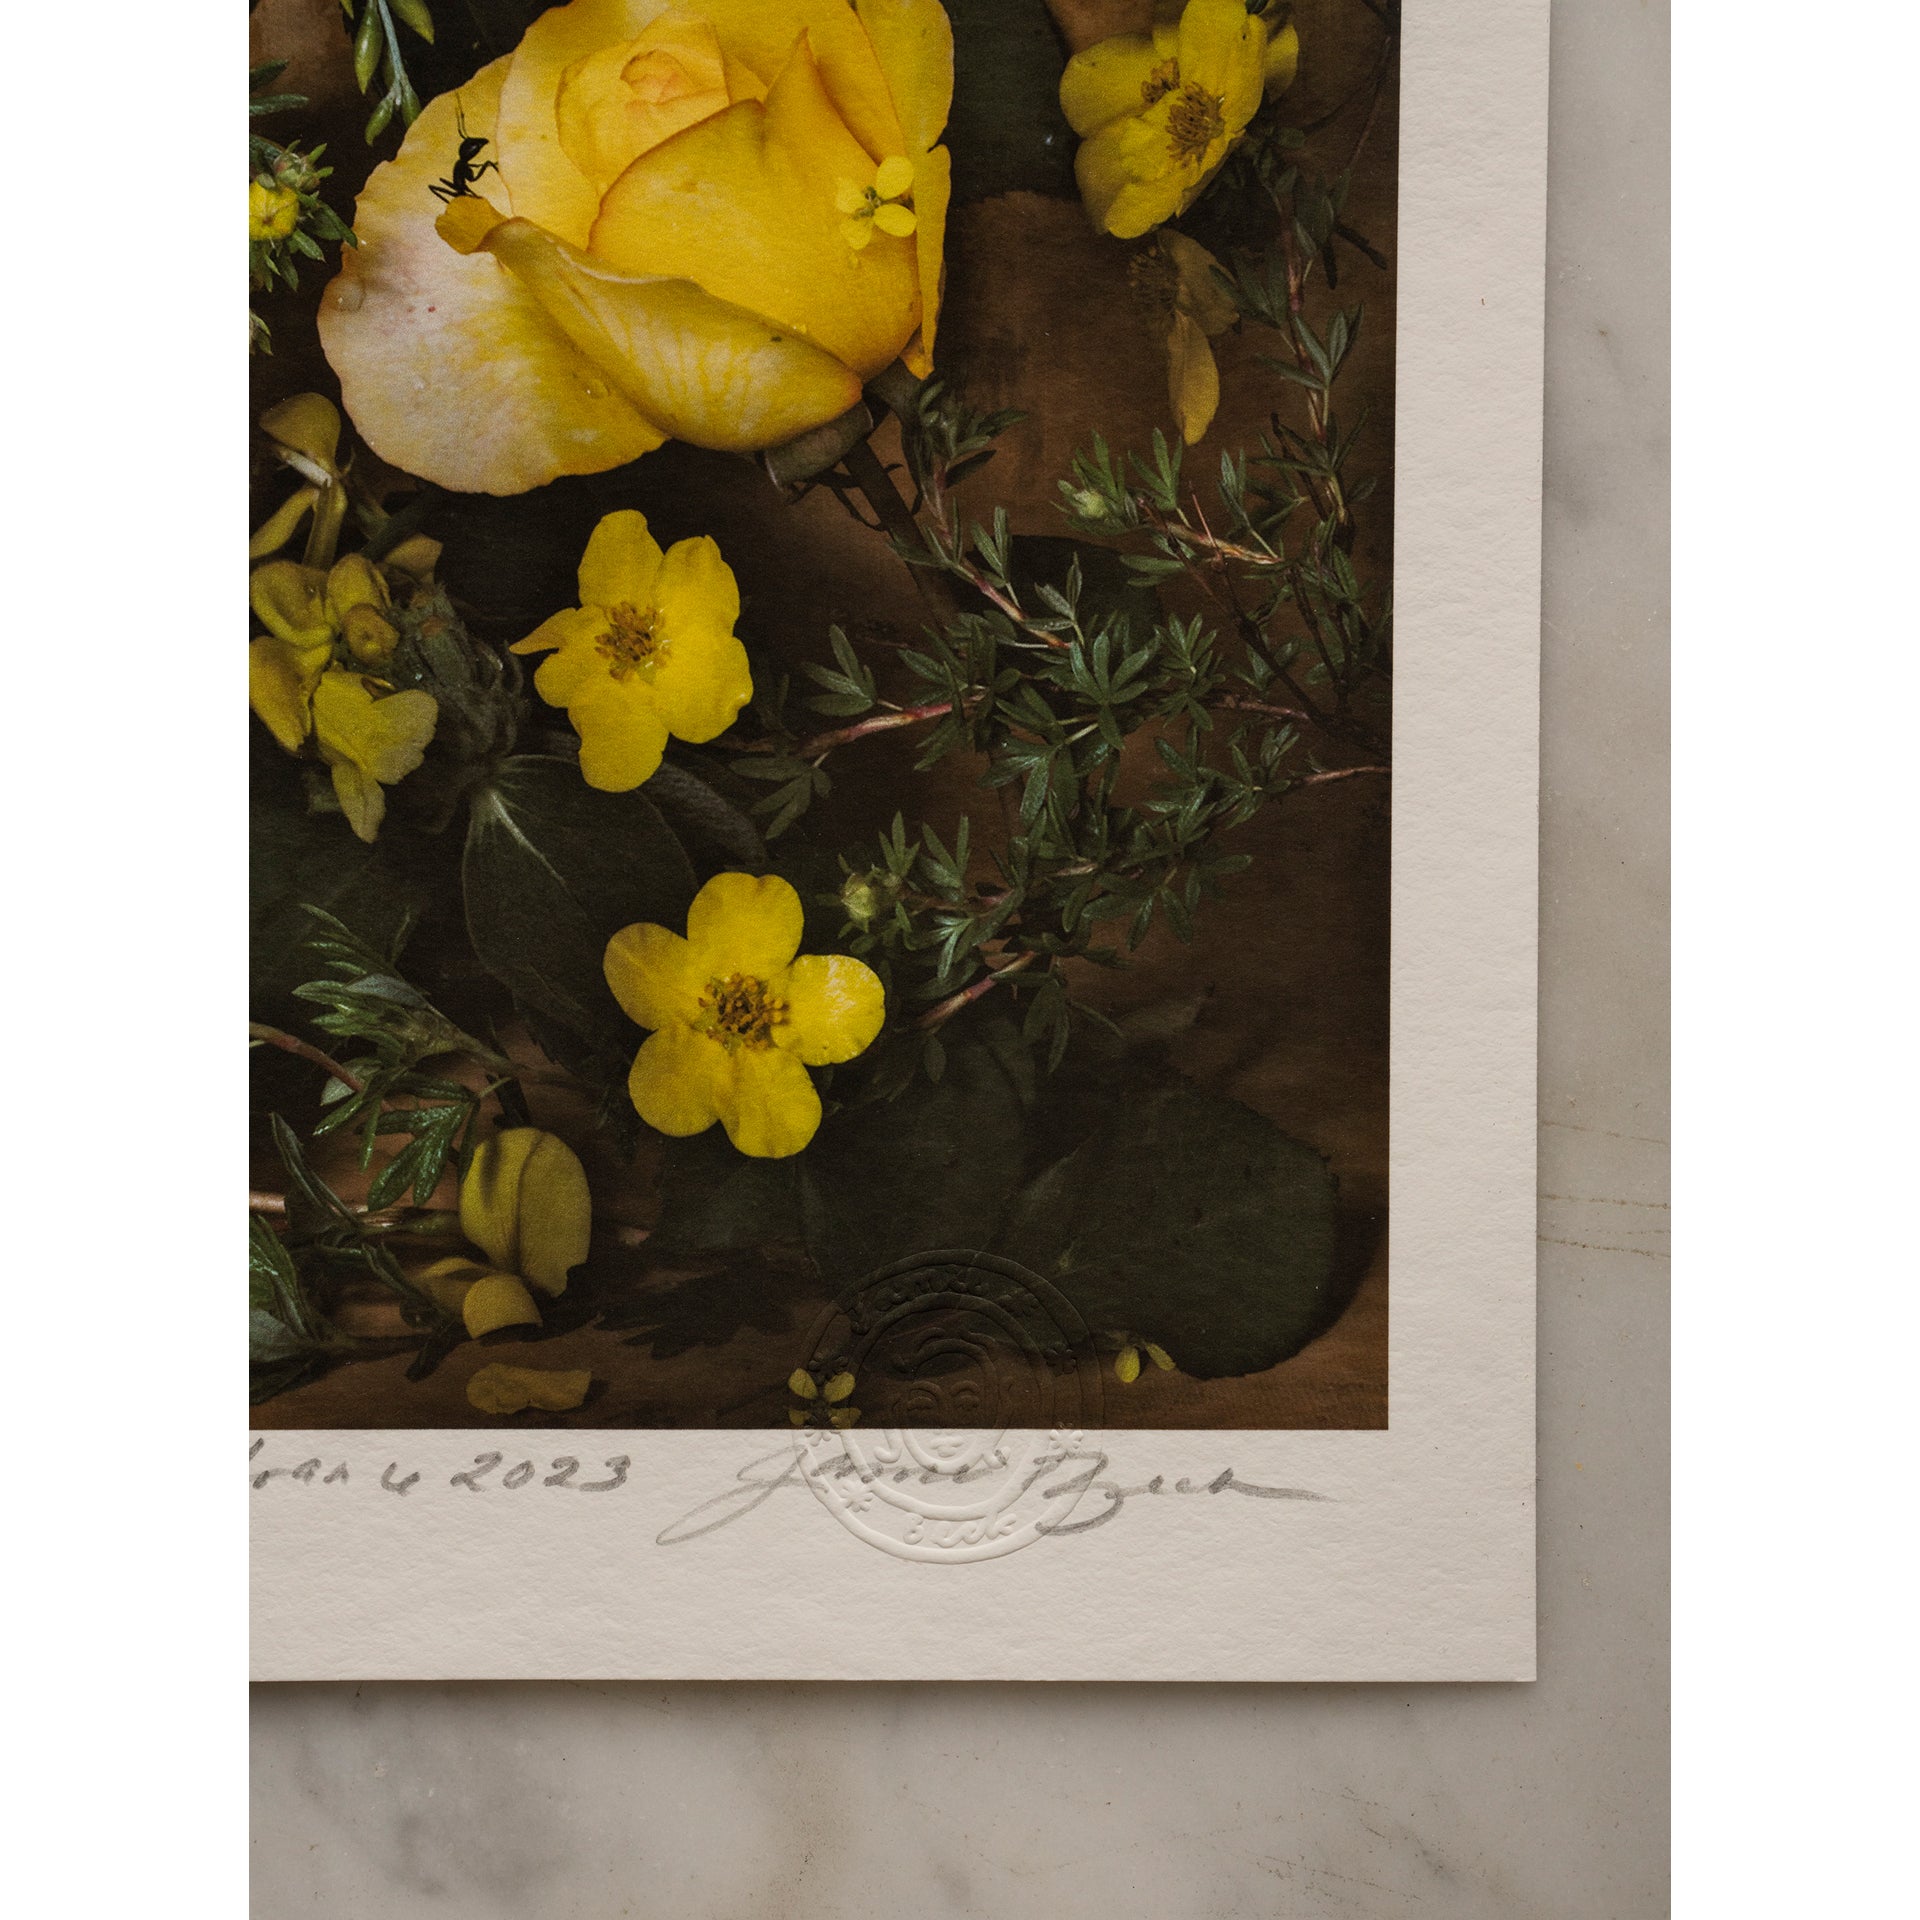 Nature's Gold • 1 of 1 signed Artist Proof